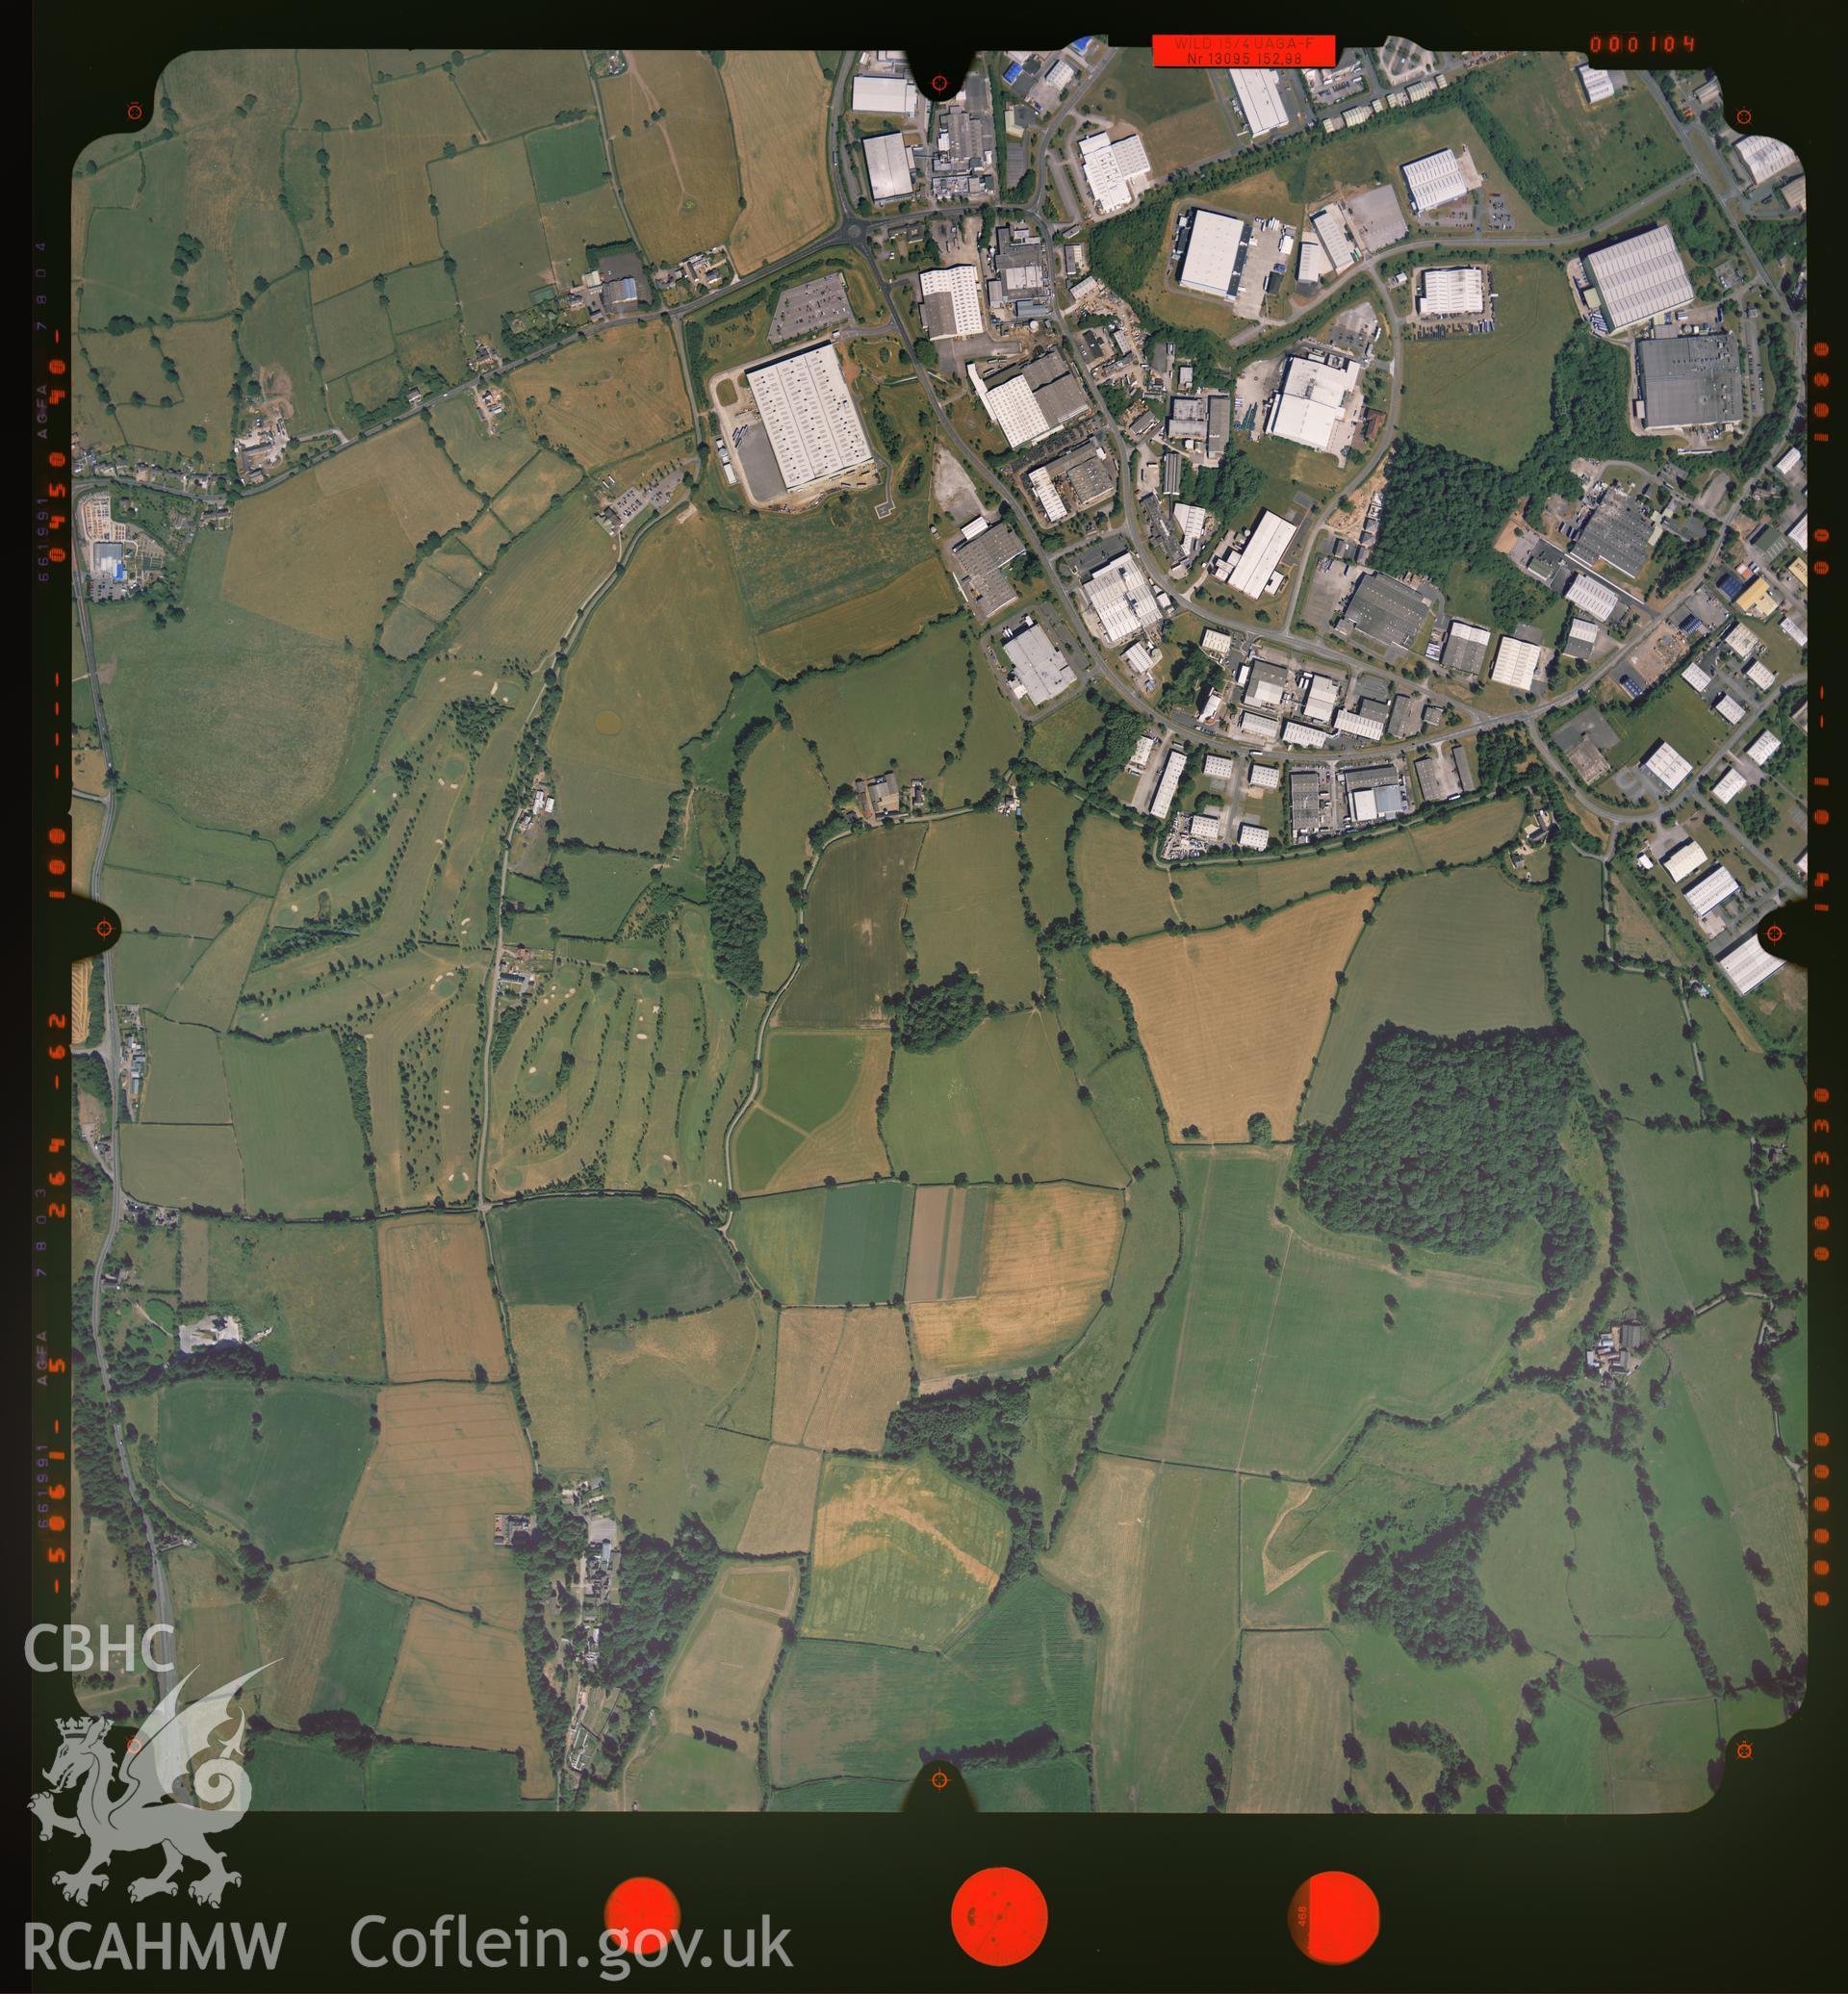 Digitized copy of a colour aerial photograph showing the Llanfynydd area, taken by Ordnance Survey, 2002.